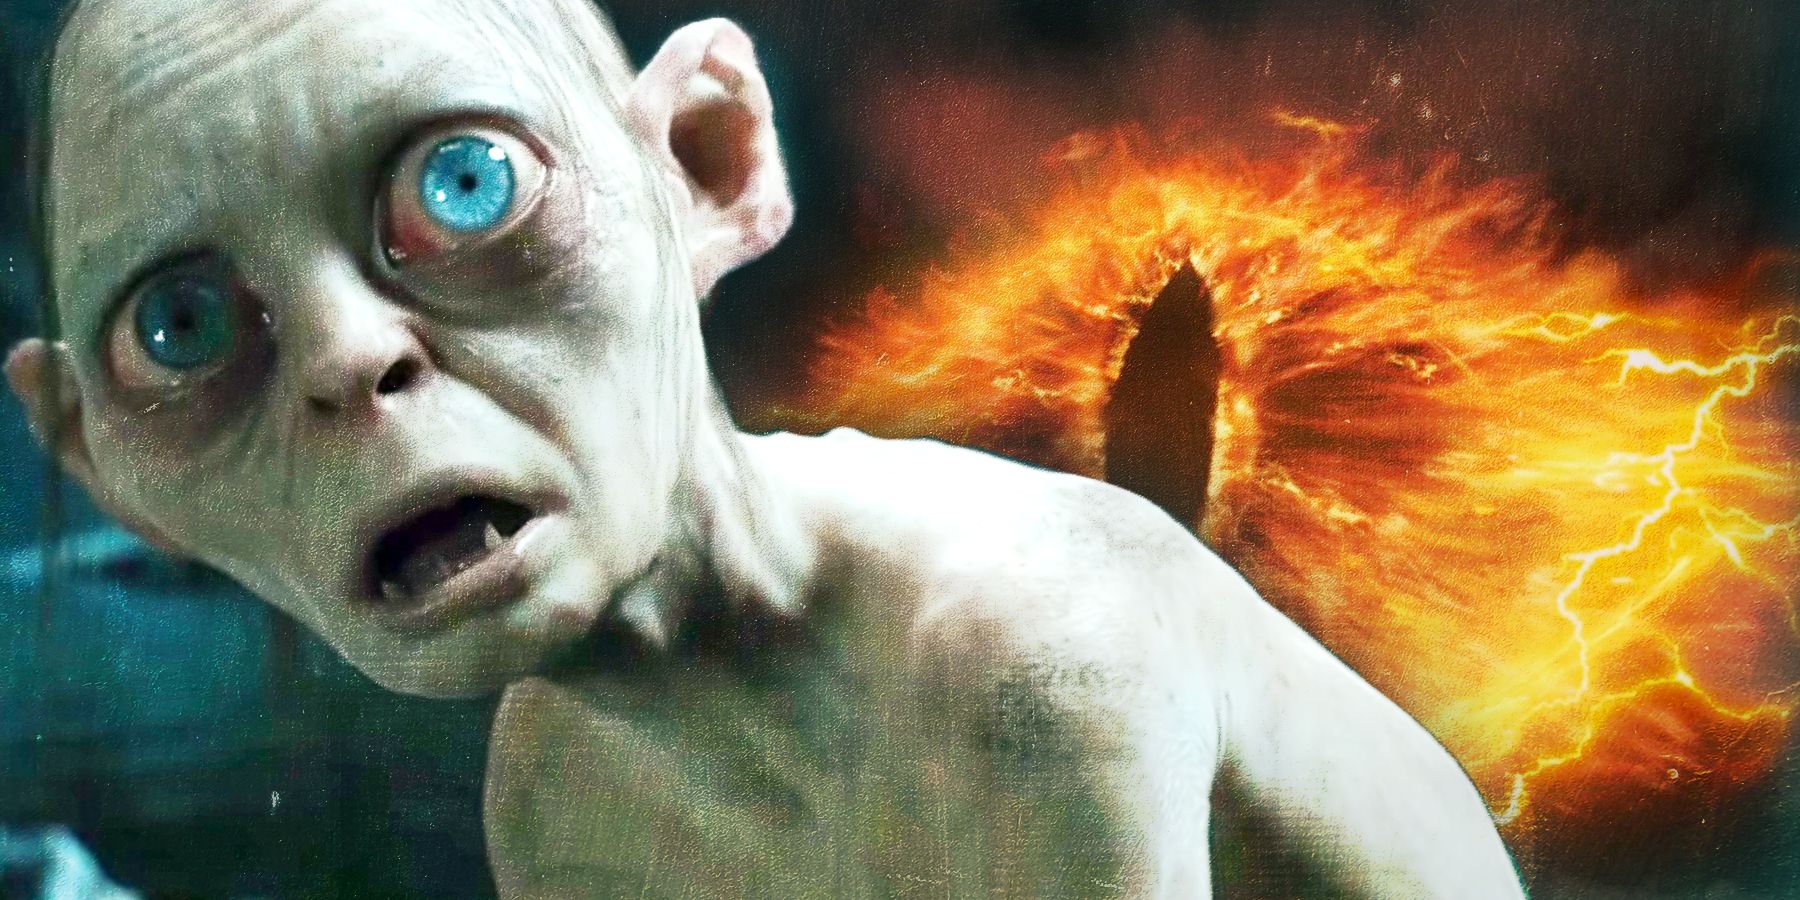 Lord of the Rings: The 5 Weirdest Things About Gollum's Body